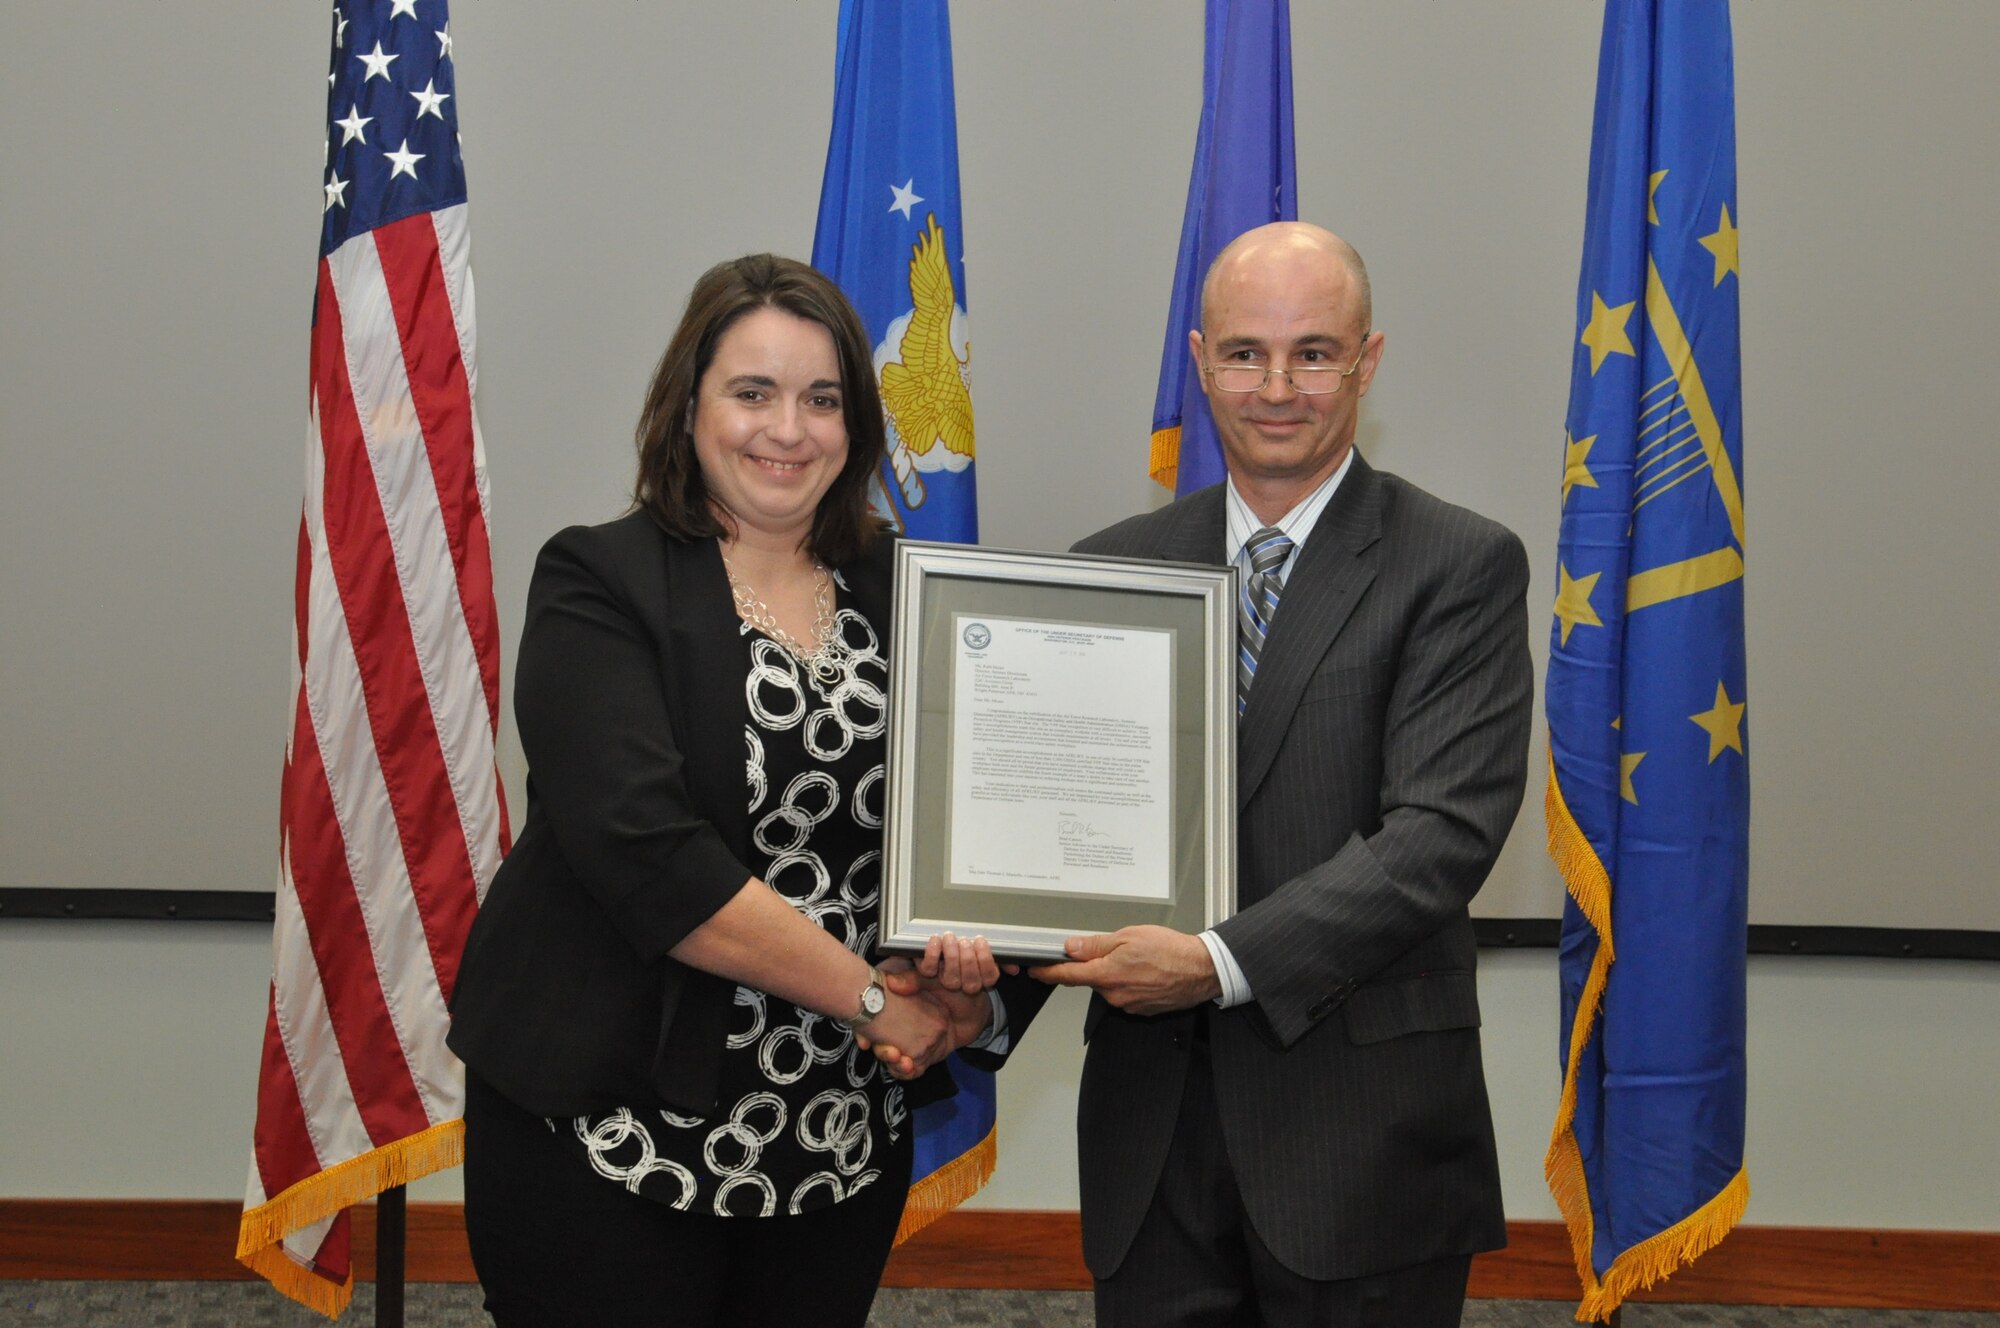 Leonard Litton III, Department of Defense Director of Personnel Risk Reduction presented a congratulatory letter from Brad Carson, performing the duties of the Principal Deputy Under Secretary of Defense for Personnel and Readiness to Ruth Moser, director of the Sensors Directorate during the directorate's OSHA Voluntary Protection Program Star Site award recognition ceremony April 13. The letter stated that the directorate is one of only 56 certified VPP Star sites in the Department of Defense and one of less than 2,300 OSHA certified VPP Star sites in the country. (U.S. Air Force photo/Bryan Ripple)